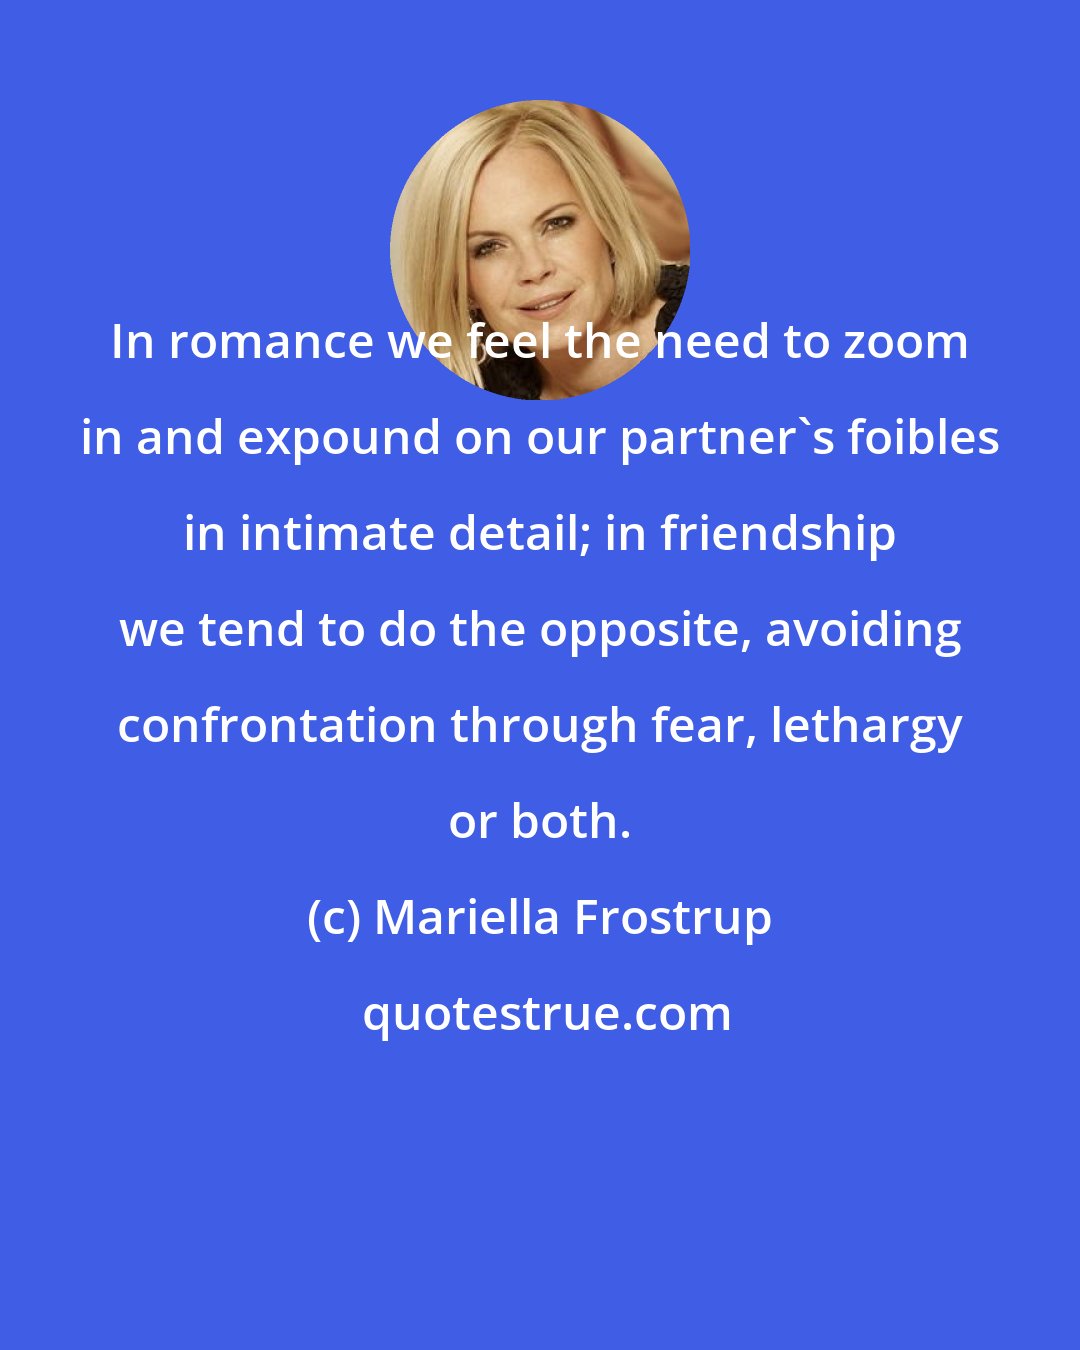 Mariella Frostrup: In romance we feel the need to zoom in and expound on our partner's foibles in intimate detail; in friendship we tend to do the opposite, avoiding confrontation through fear, lethargy or both.